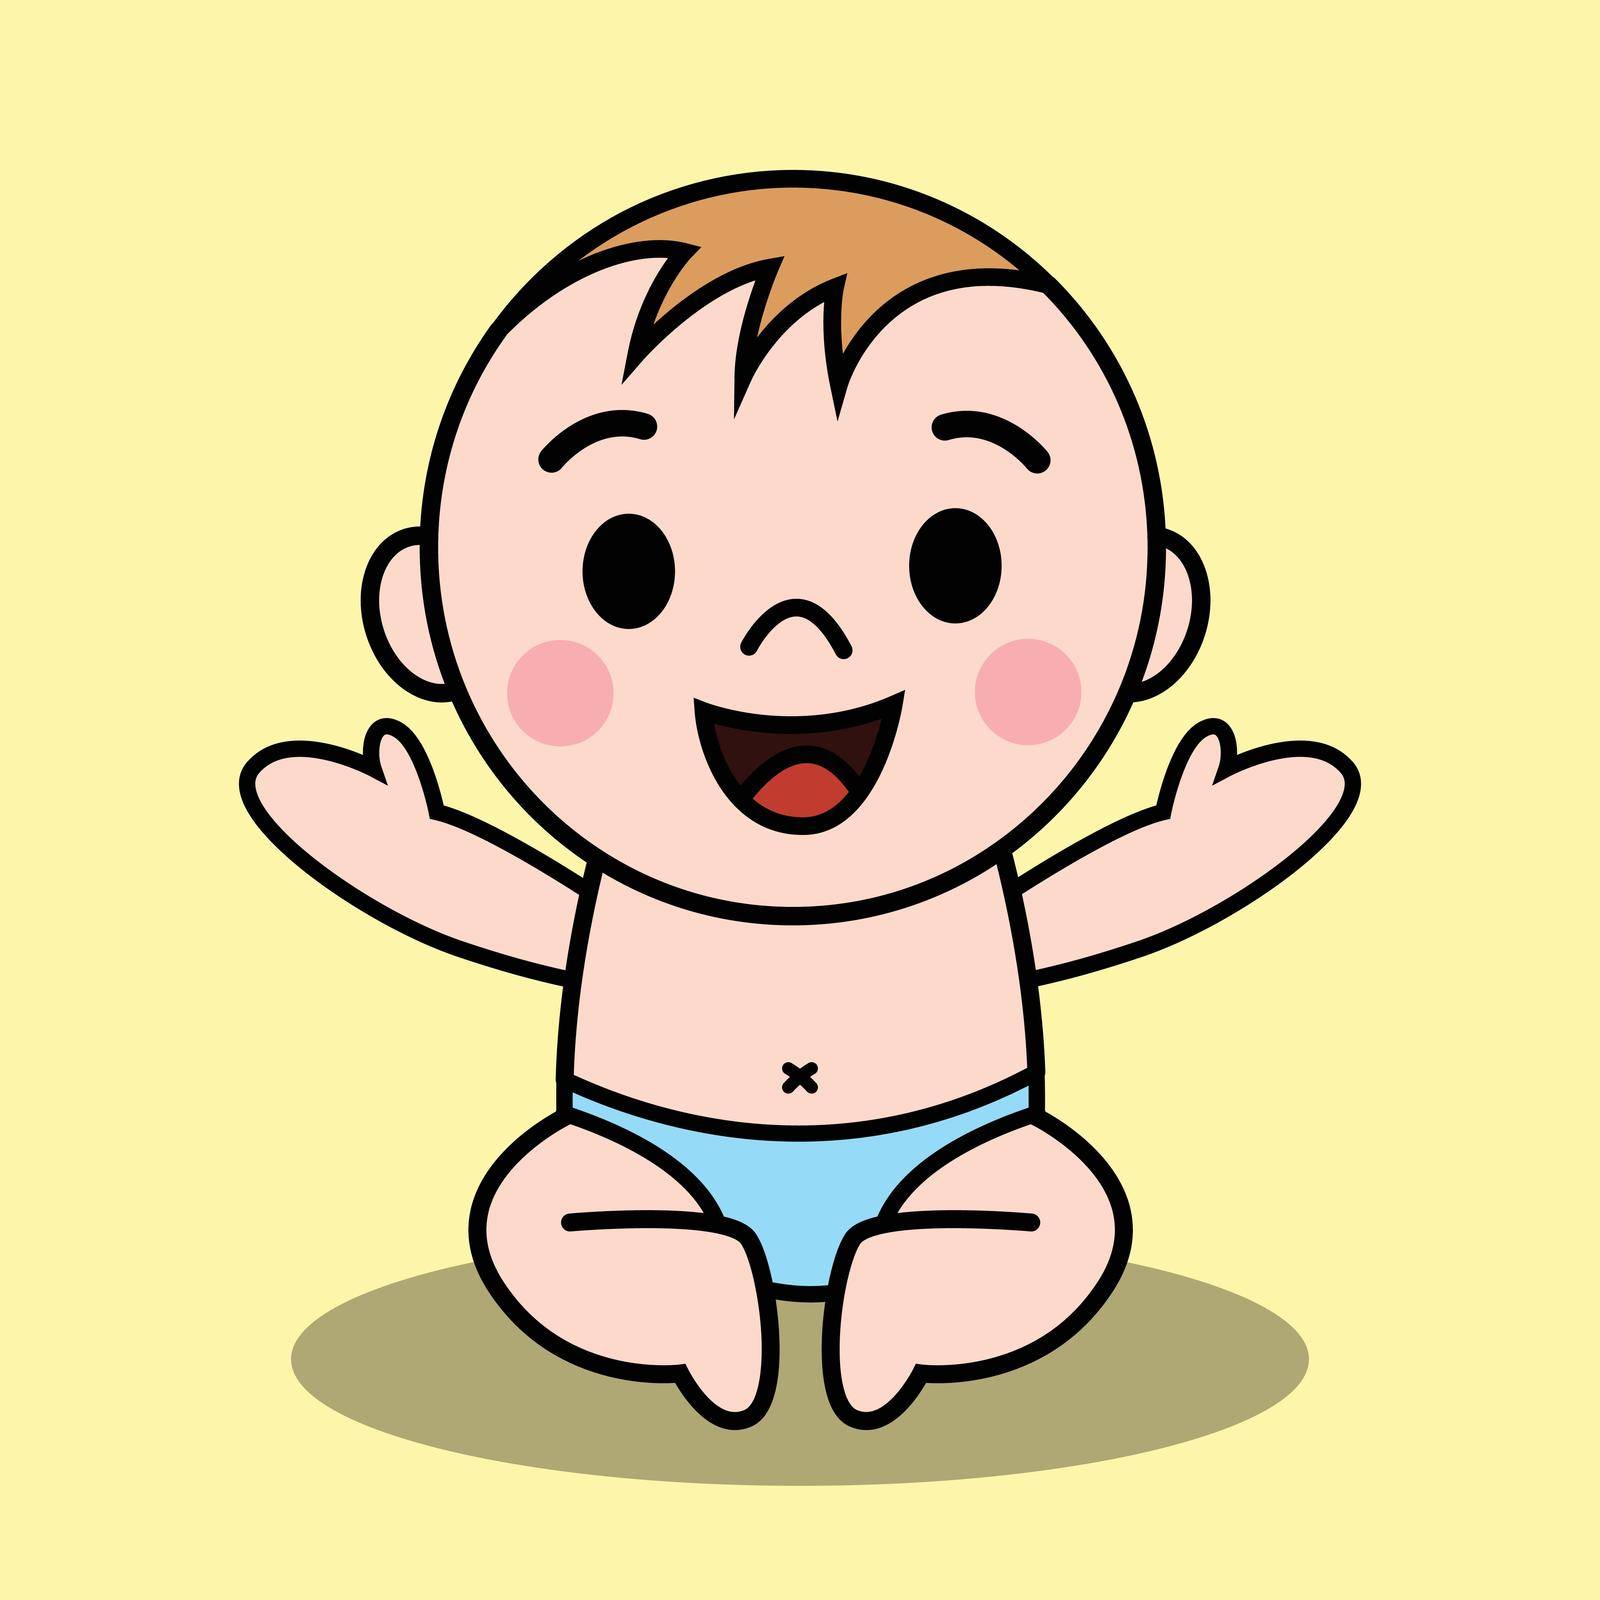 Vector illustration Of a baby. He is sitting and Smiling and open his arms to request to be carry.